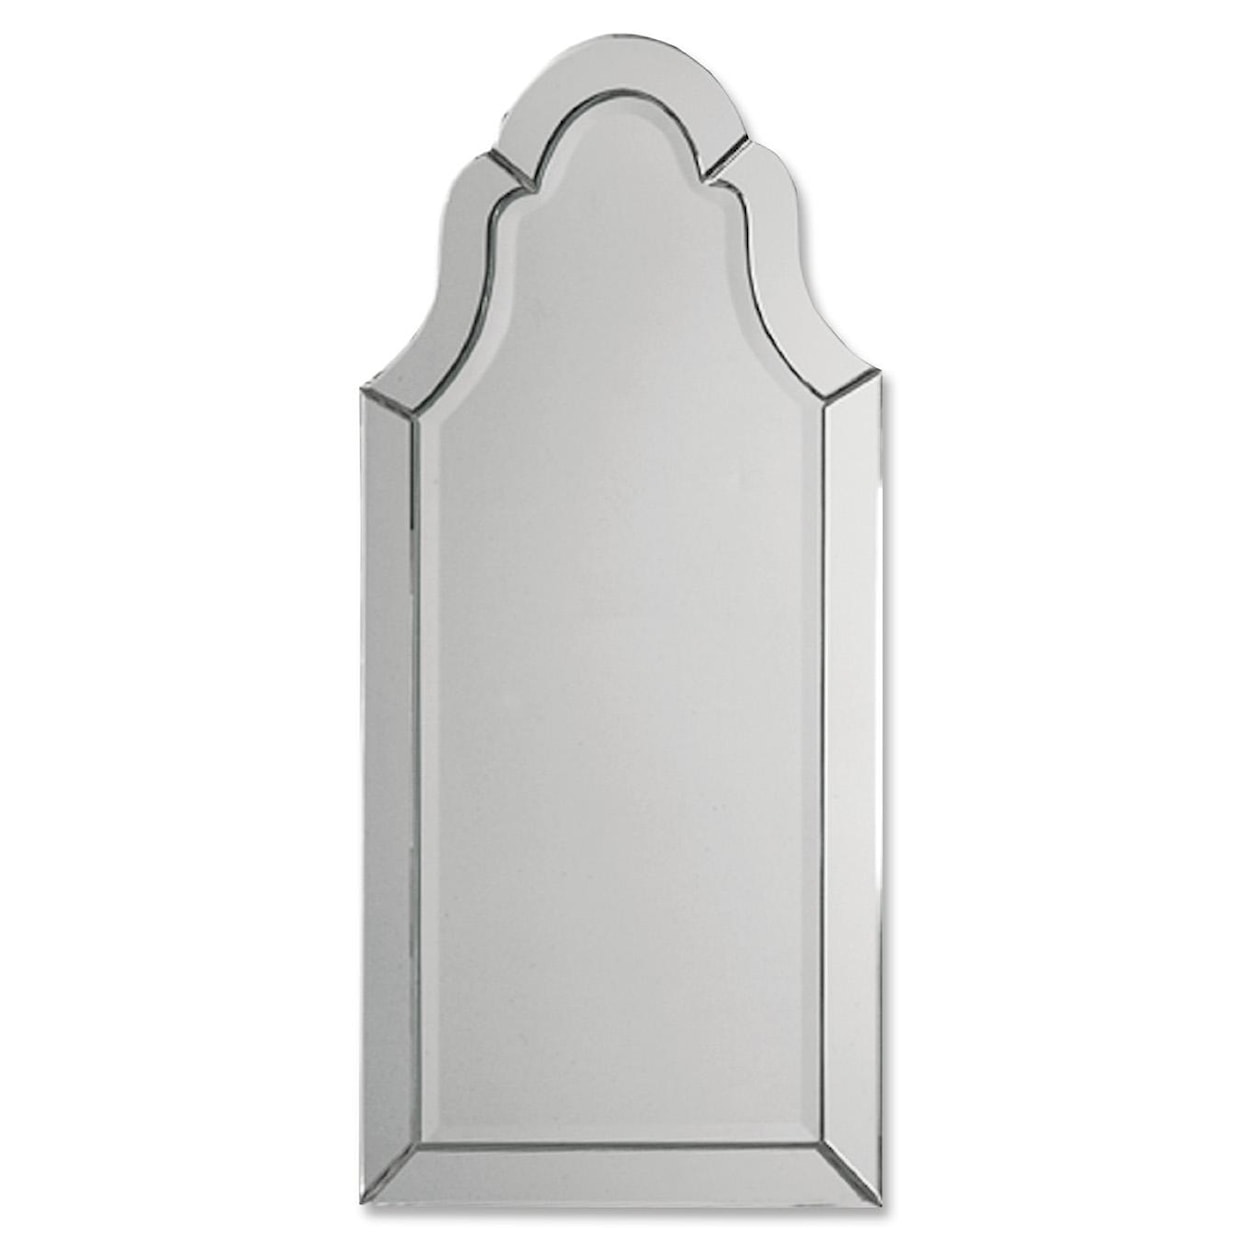 Uttermost Arched Mirror Hovan